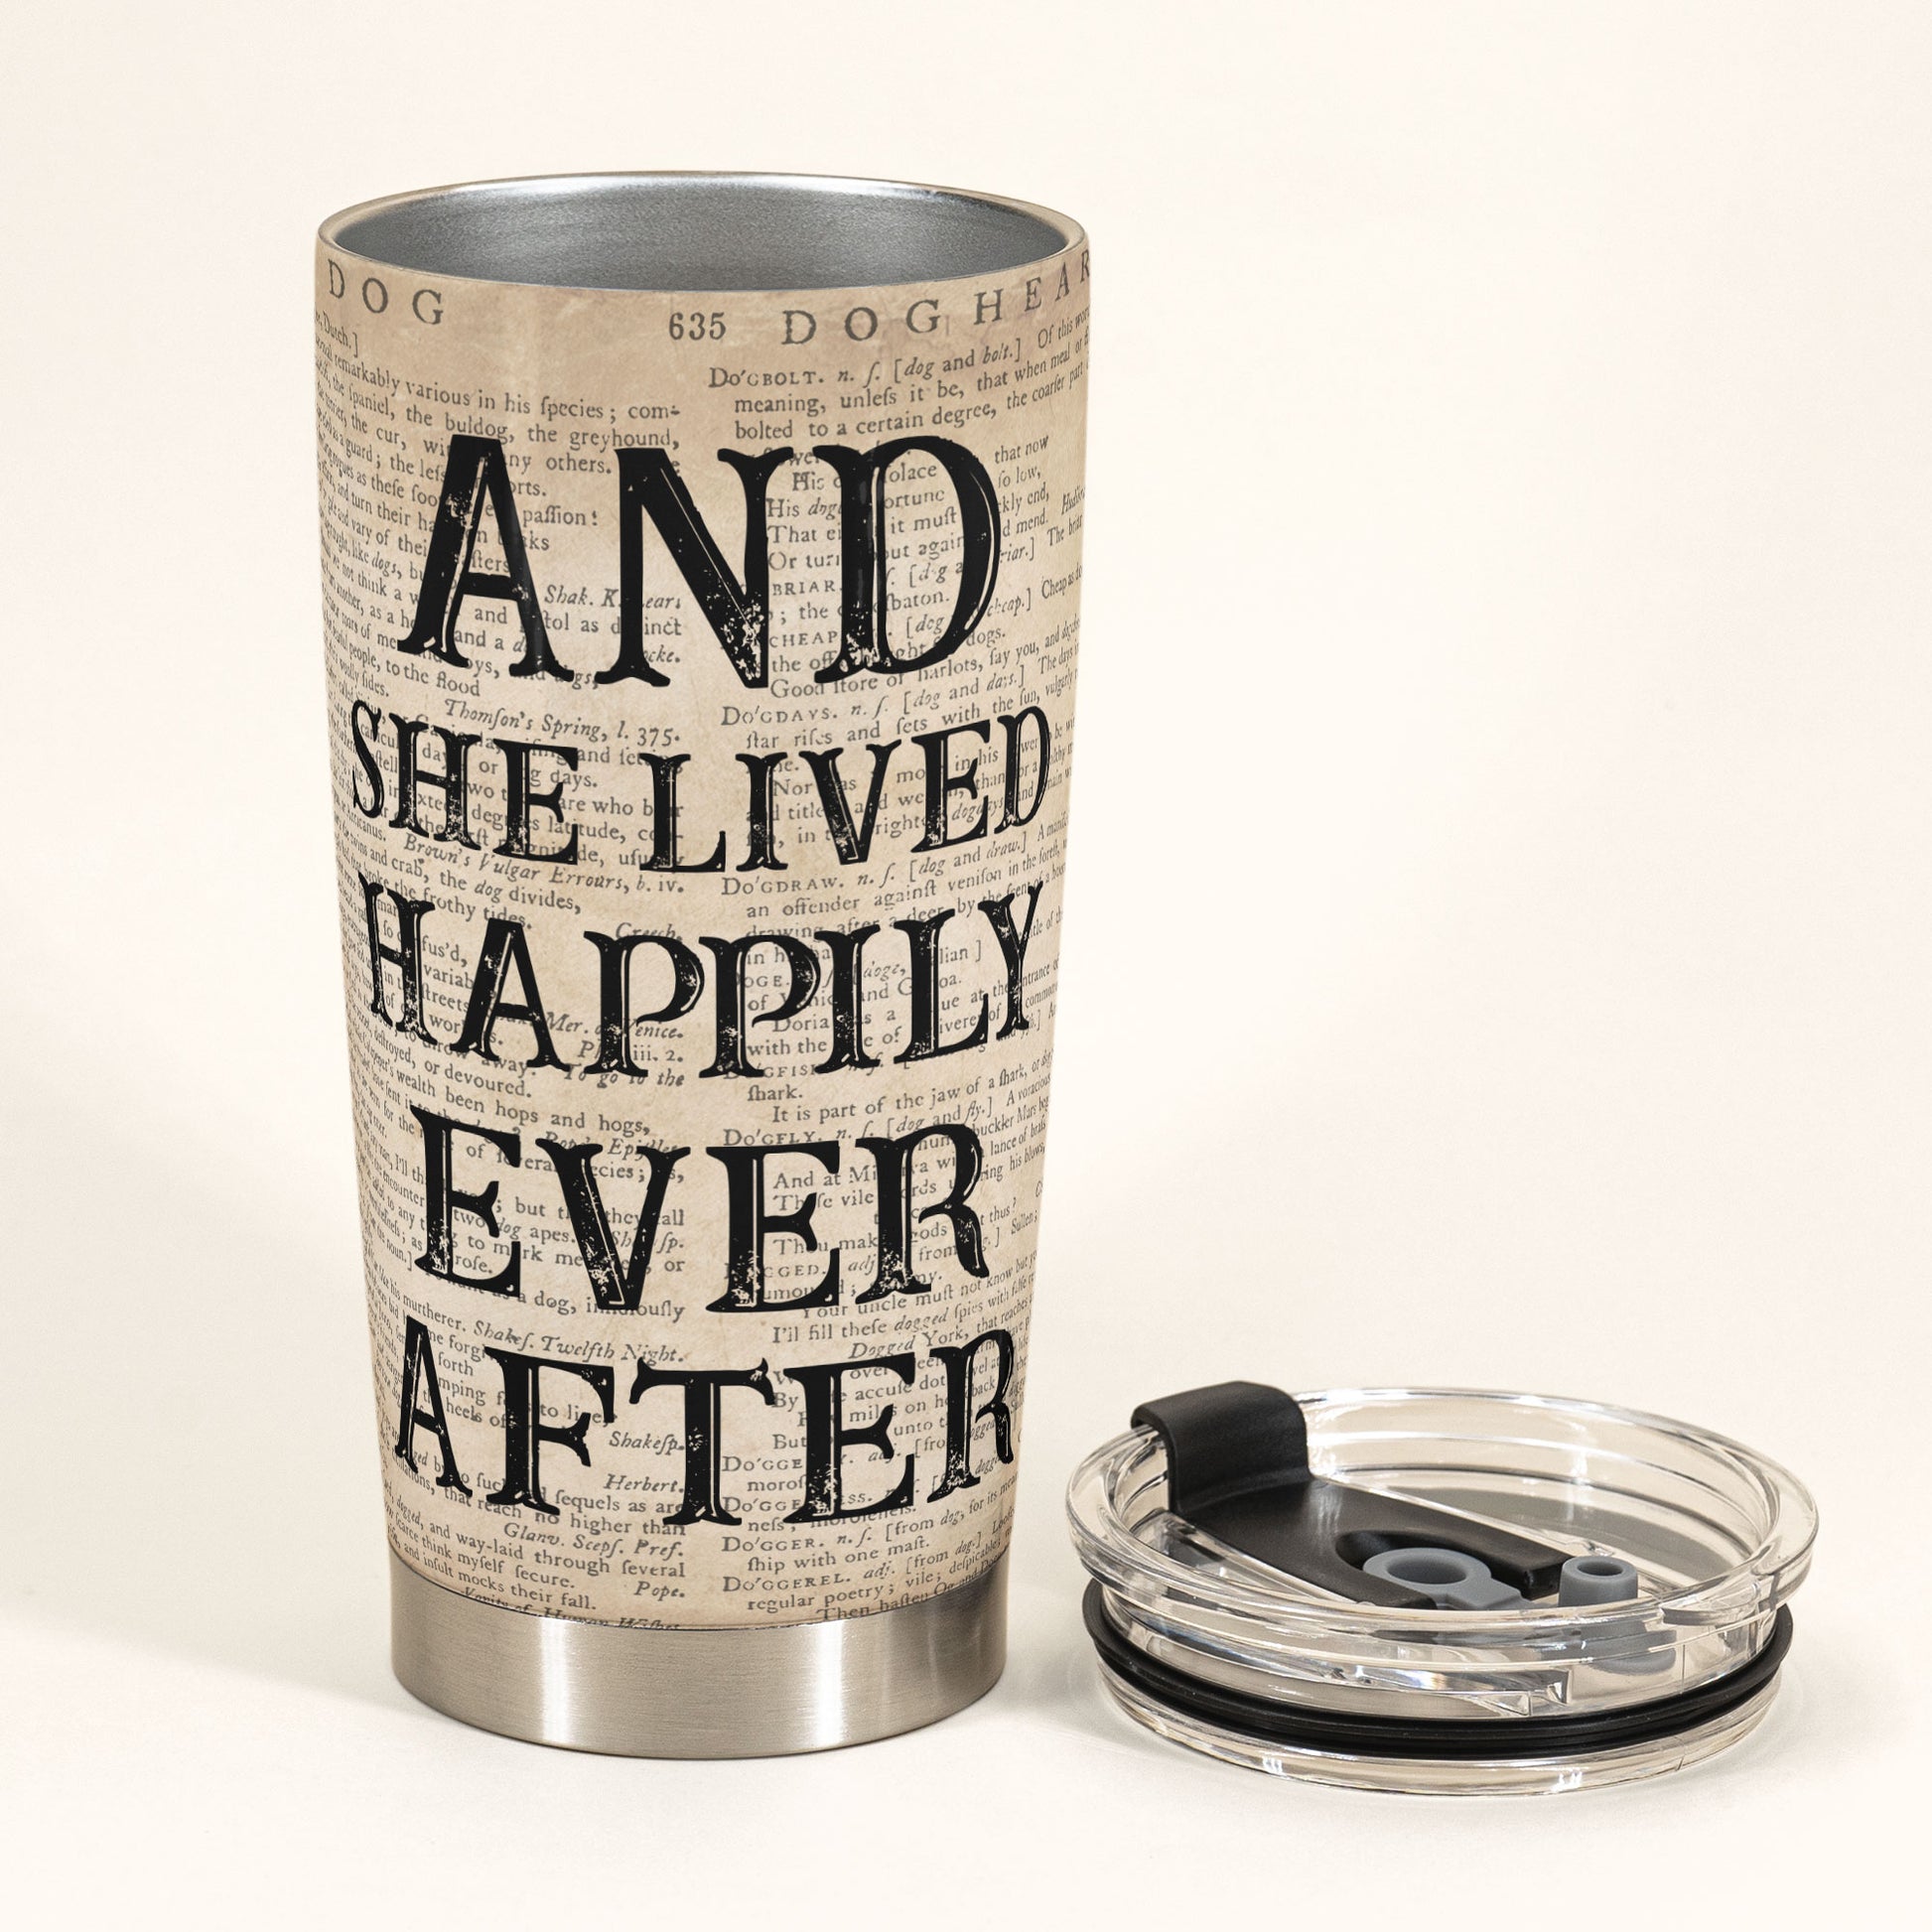 And She Lived Happily Ever After - Personalized Poster/Canvas - Gift For Dog Lover - Dictionary Template